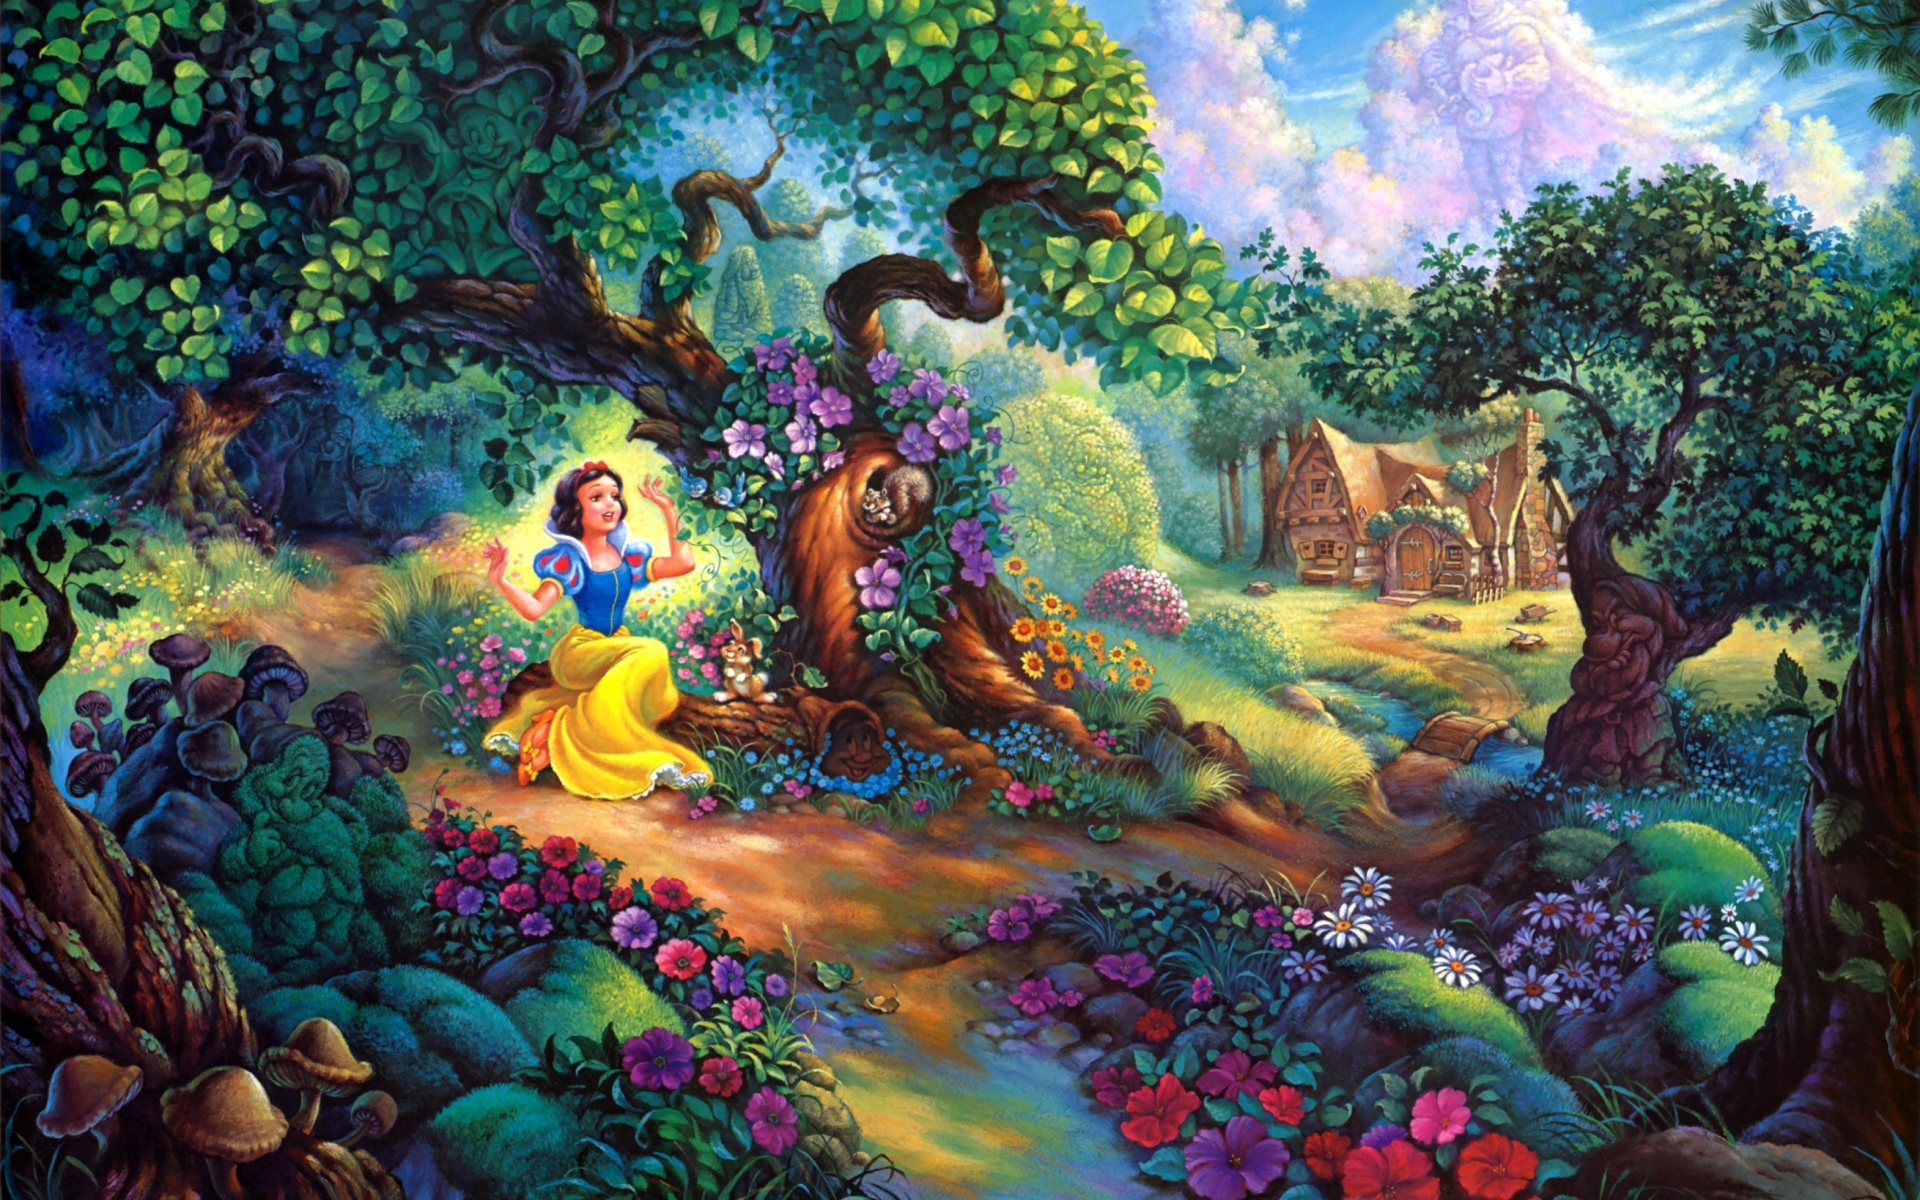 Snow White In Magical Forest wallpaper 1920x1200